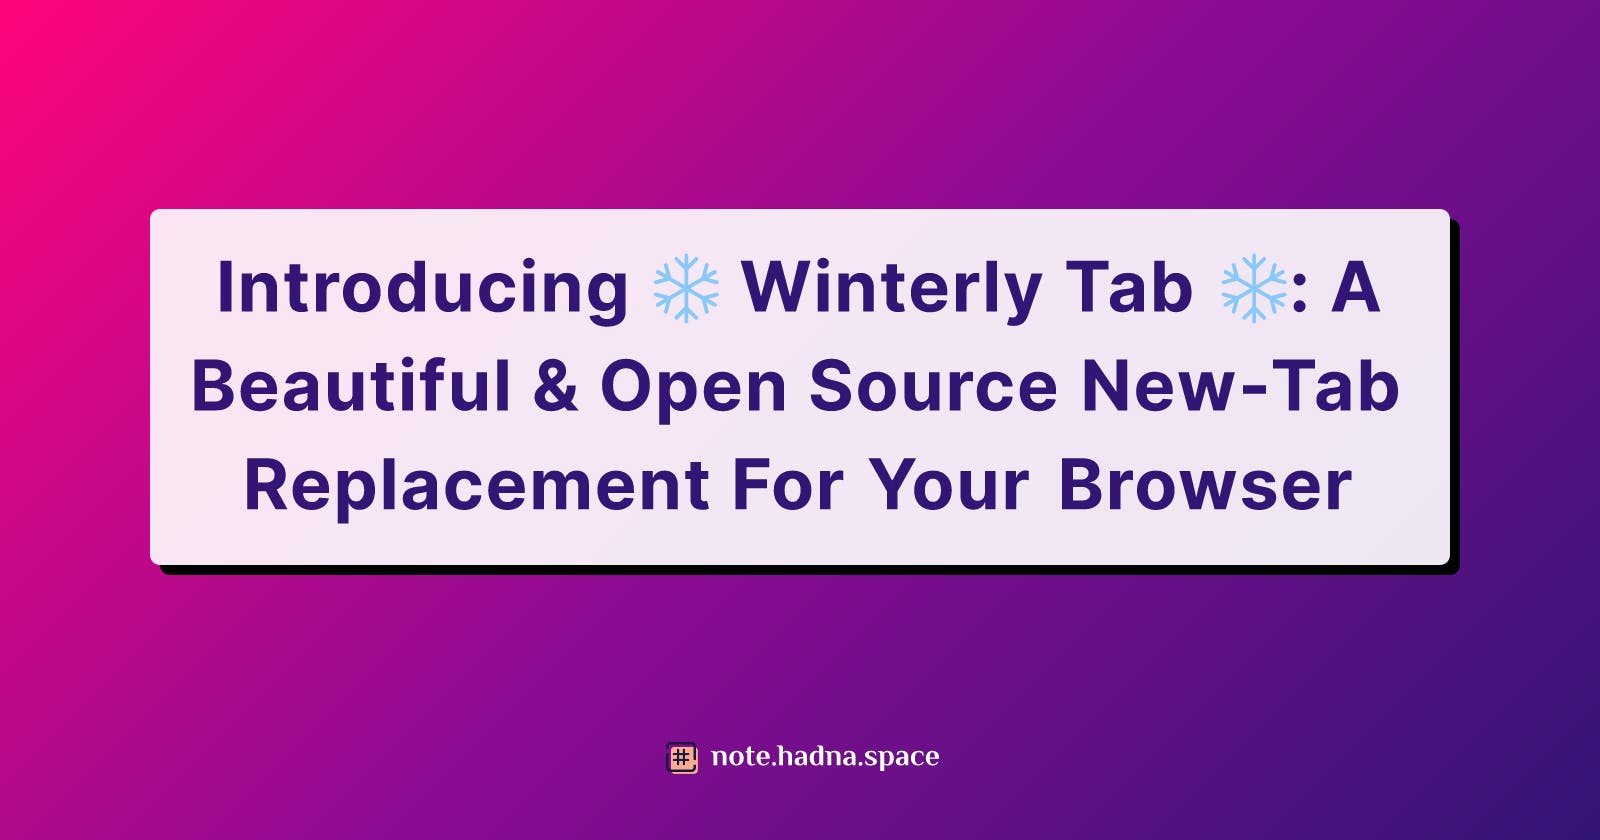 Introducing ❄️ Winterly Tab ❄️: A Beautiful & Open Source New-Tab Replacement For Your Browser